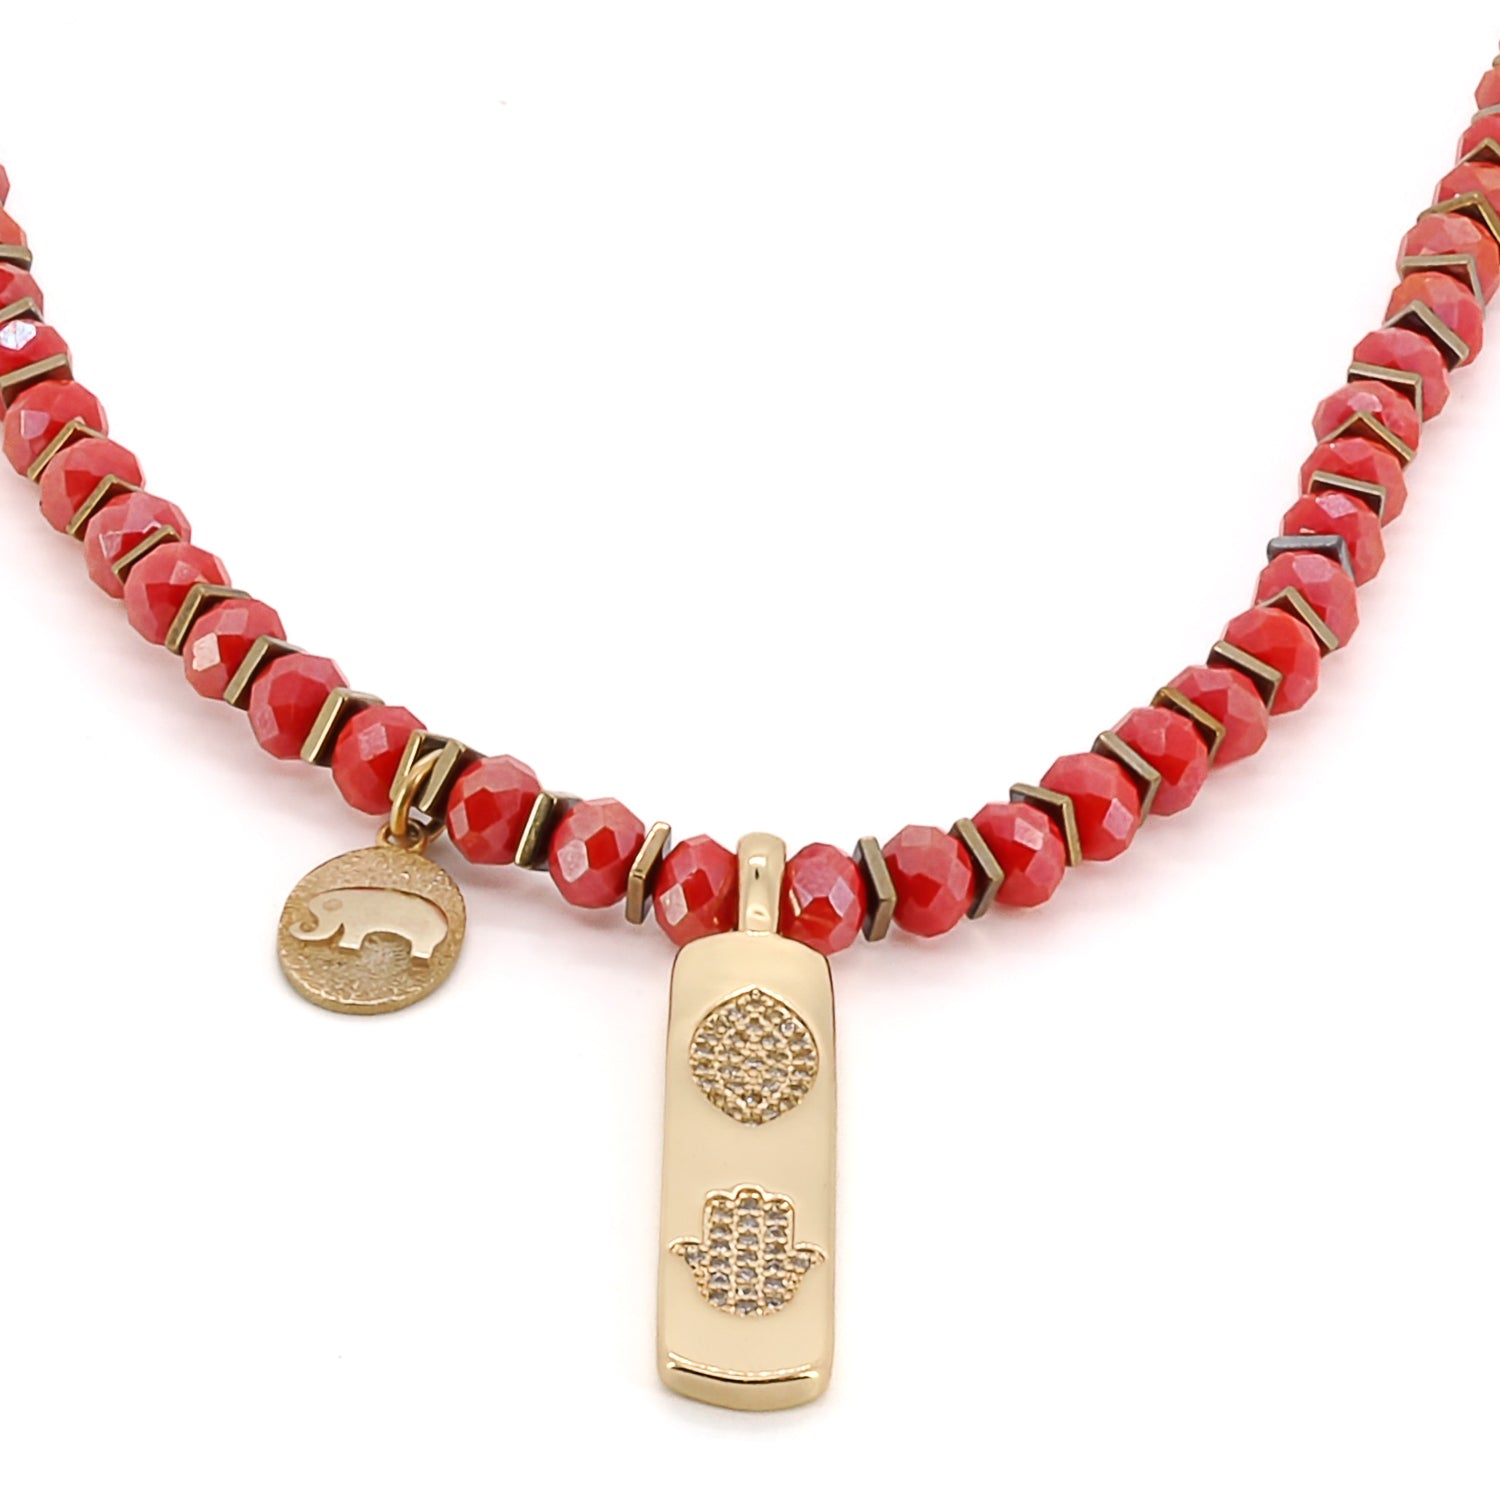 Stylish and spiritual Summer Journey Necklace with orange crystal beads and symbolic charms